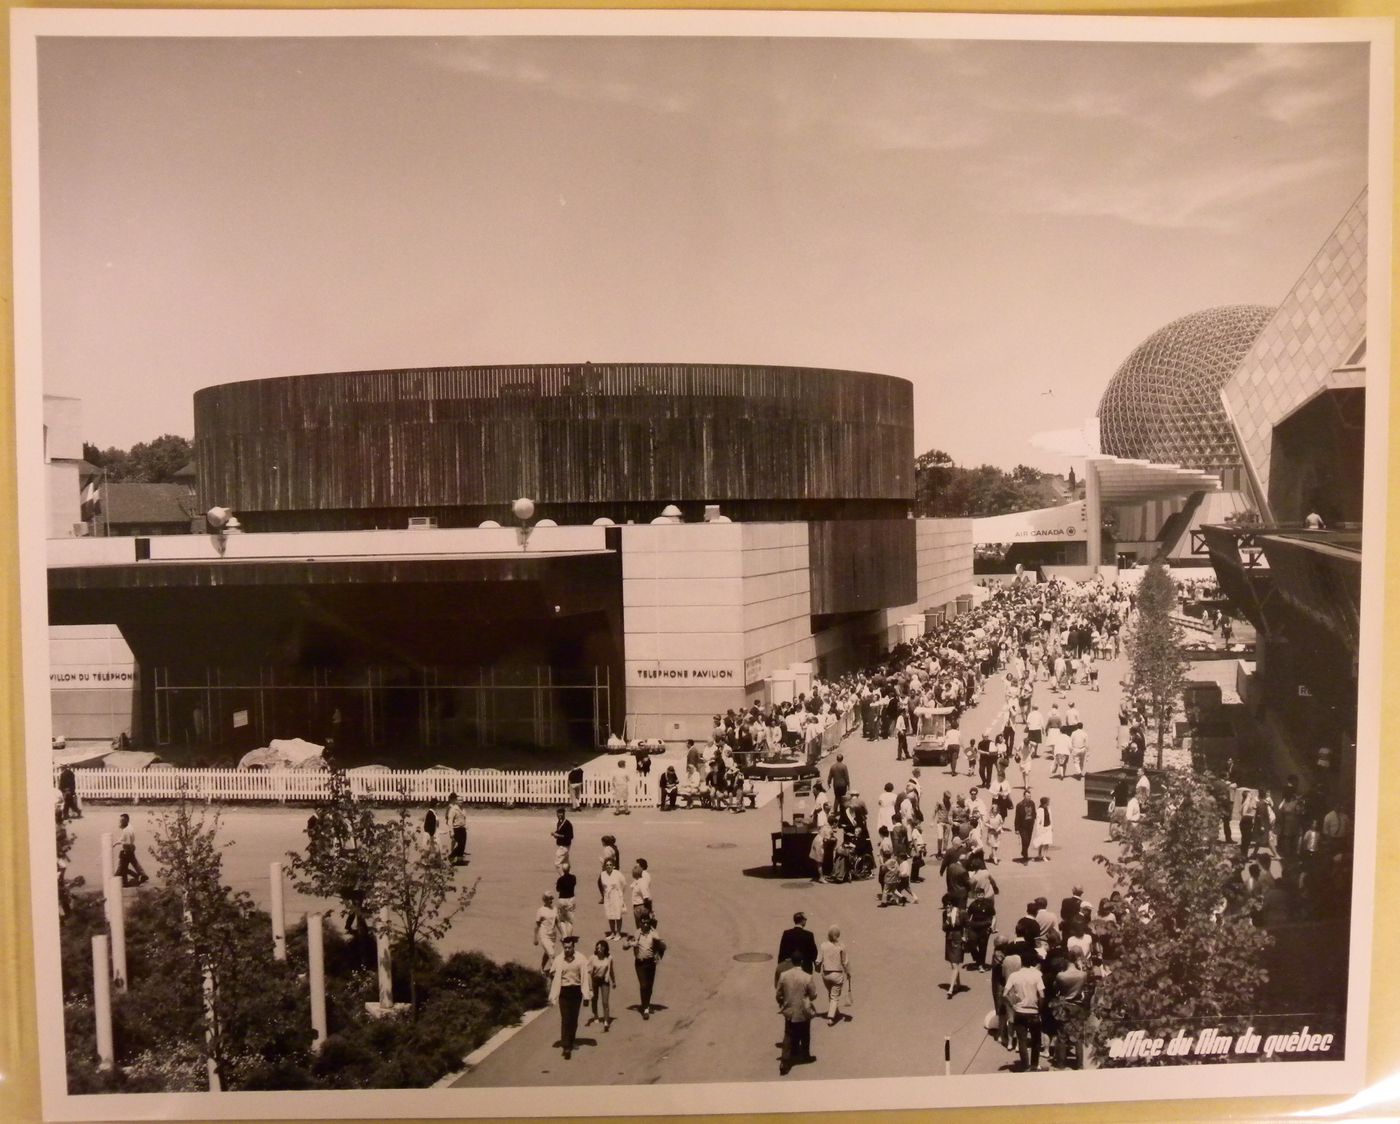 View of the Telephone Pavilion with the Air Canada Pavilion in background, Expo 67, Montréal, Québec